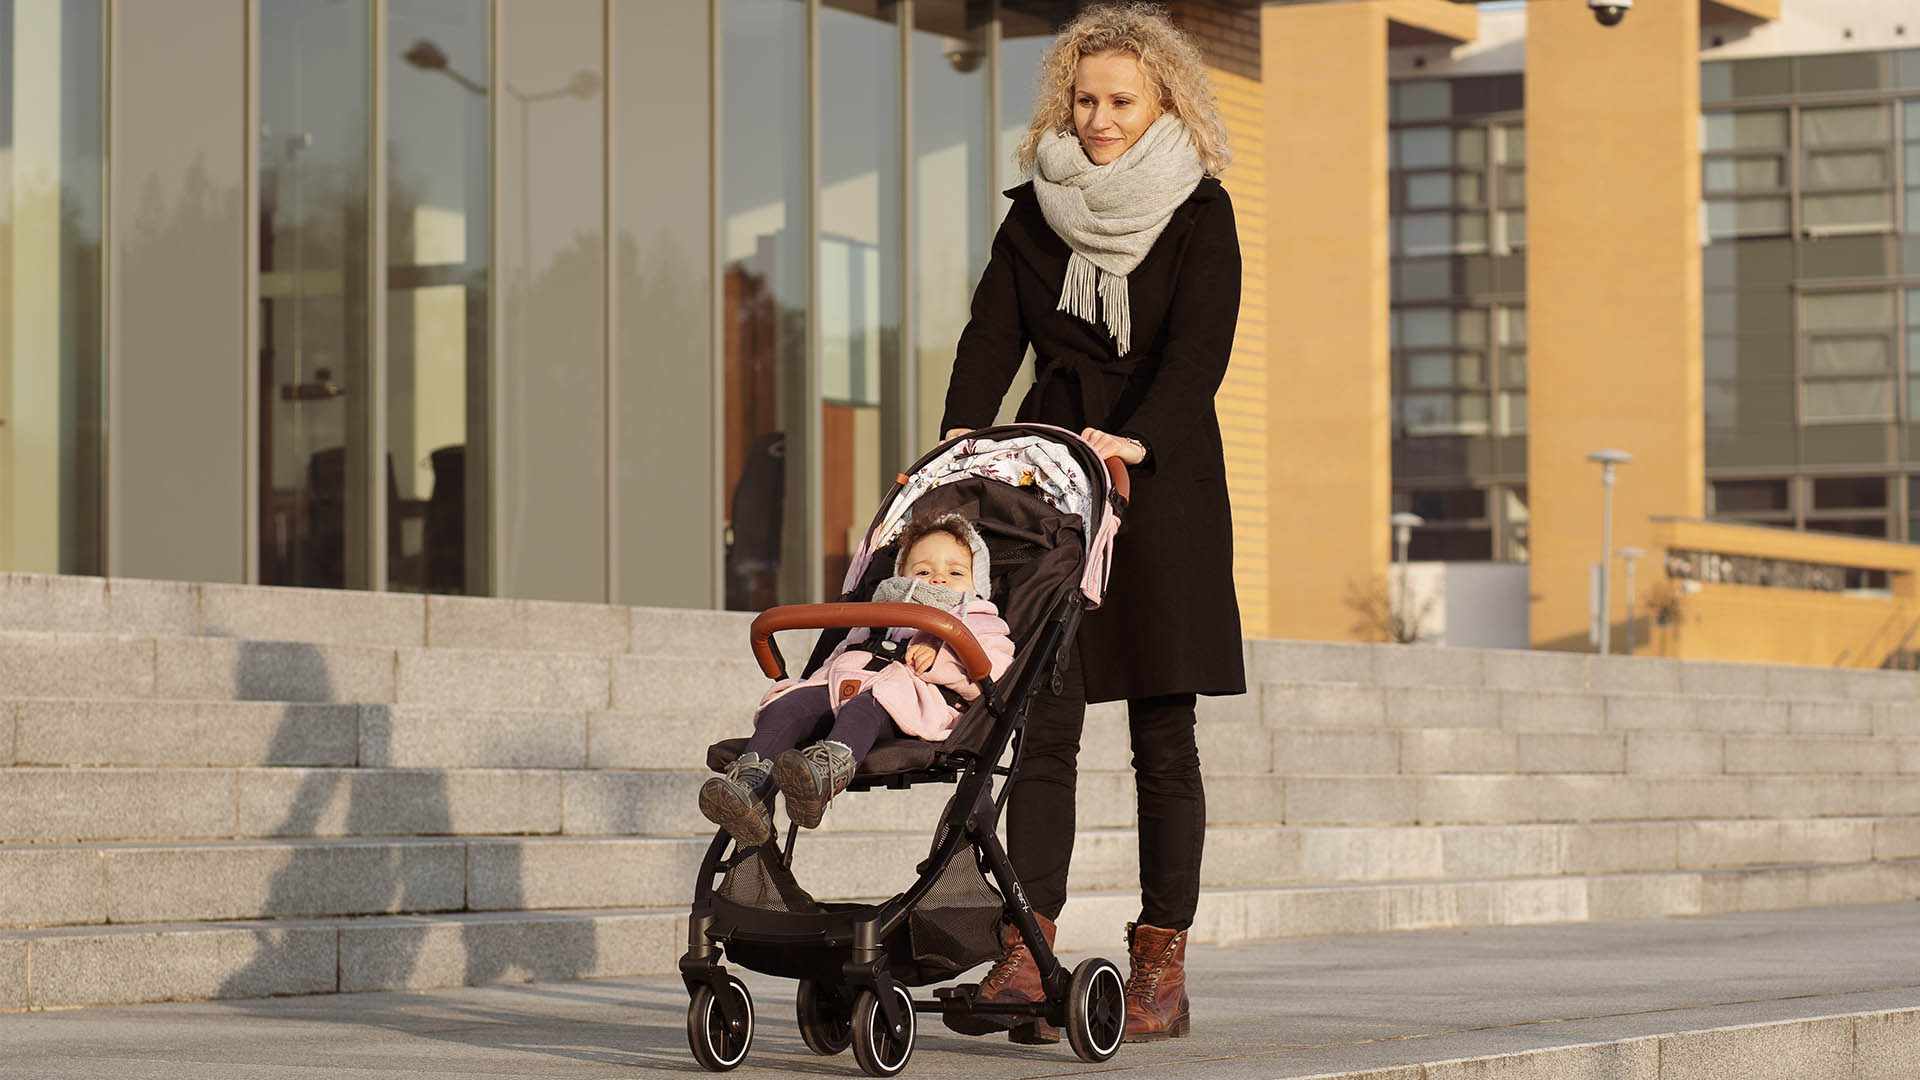 How do you choose the perfect stroller for your baby?